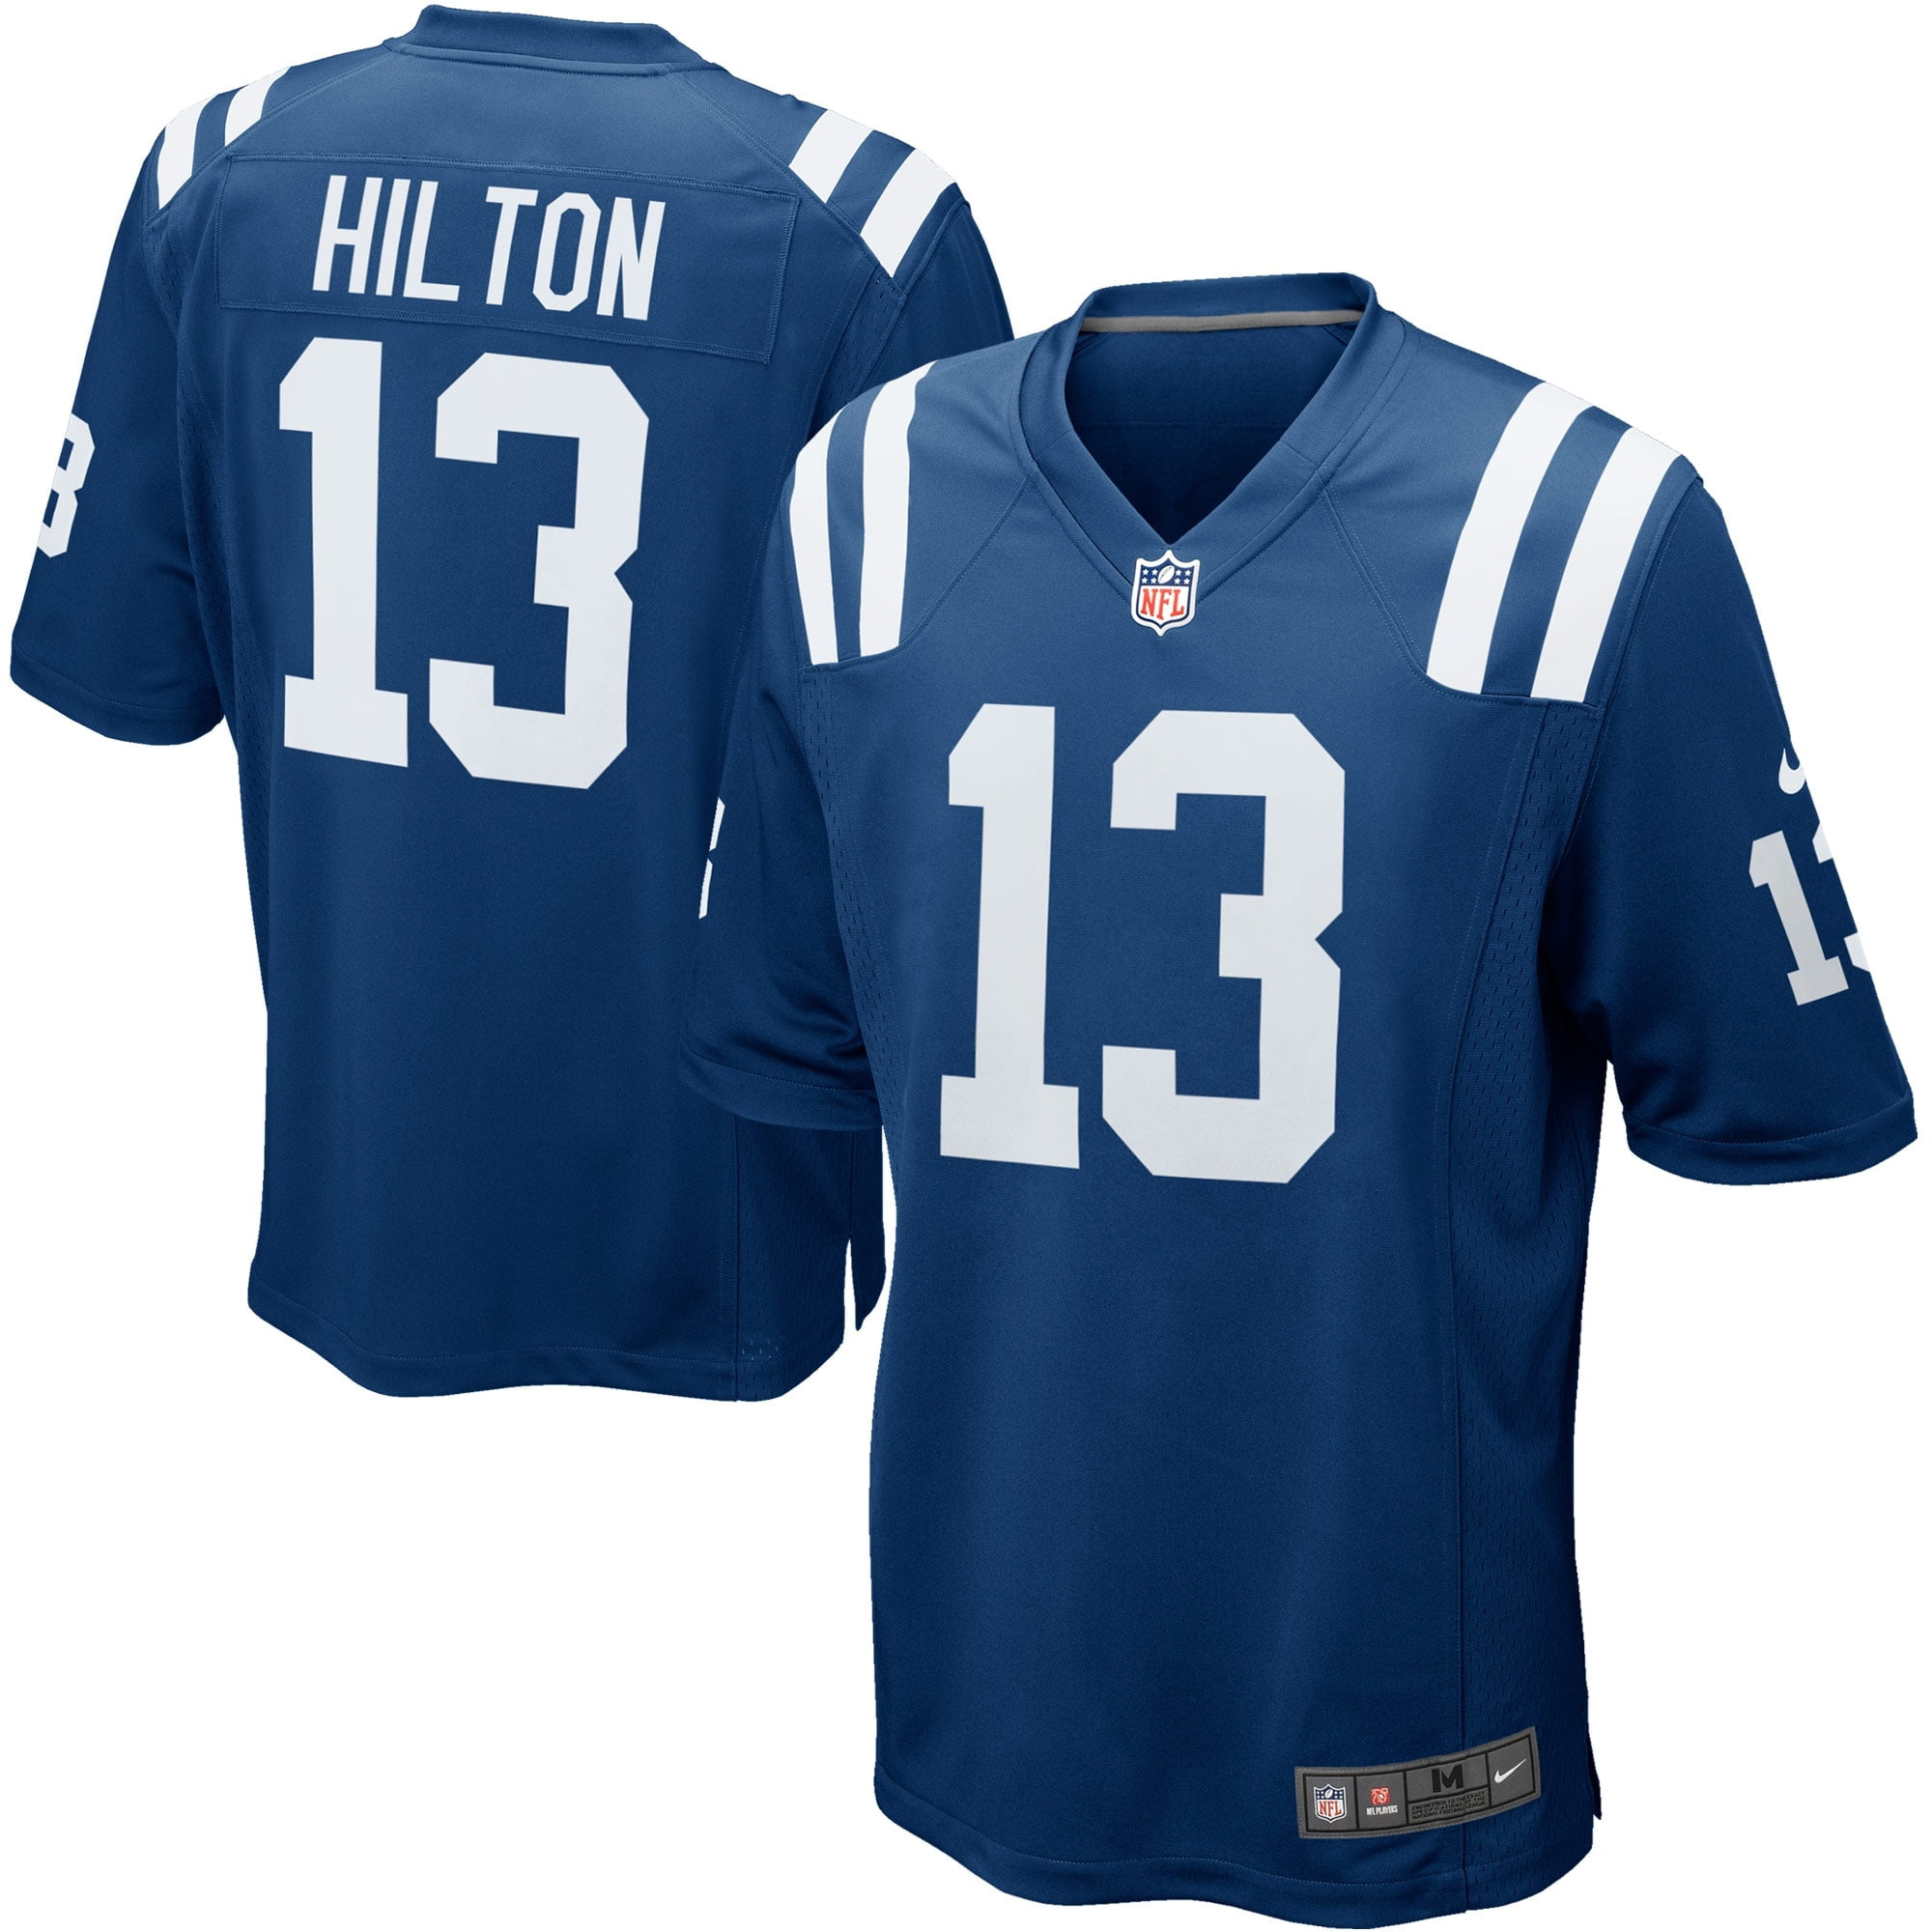 Nike Youth Home Game Jersey Indianapolis Colts T.Y. Hilton # 13 - Walmart.com - Walmart.com